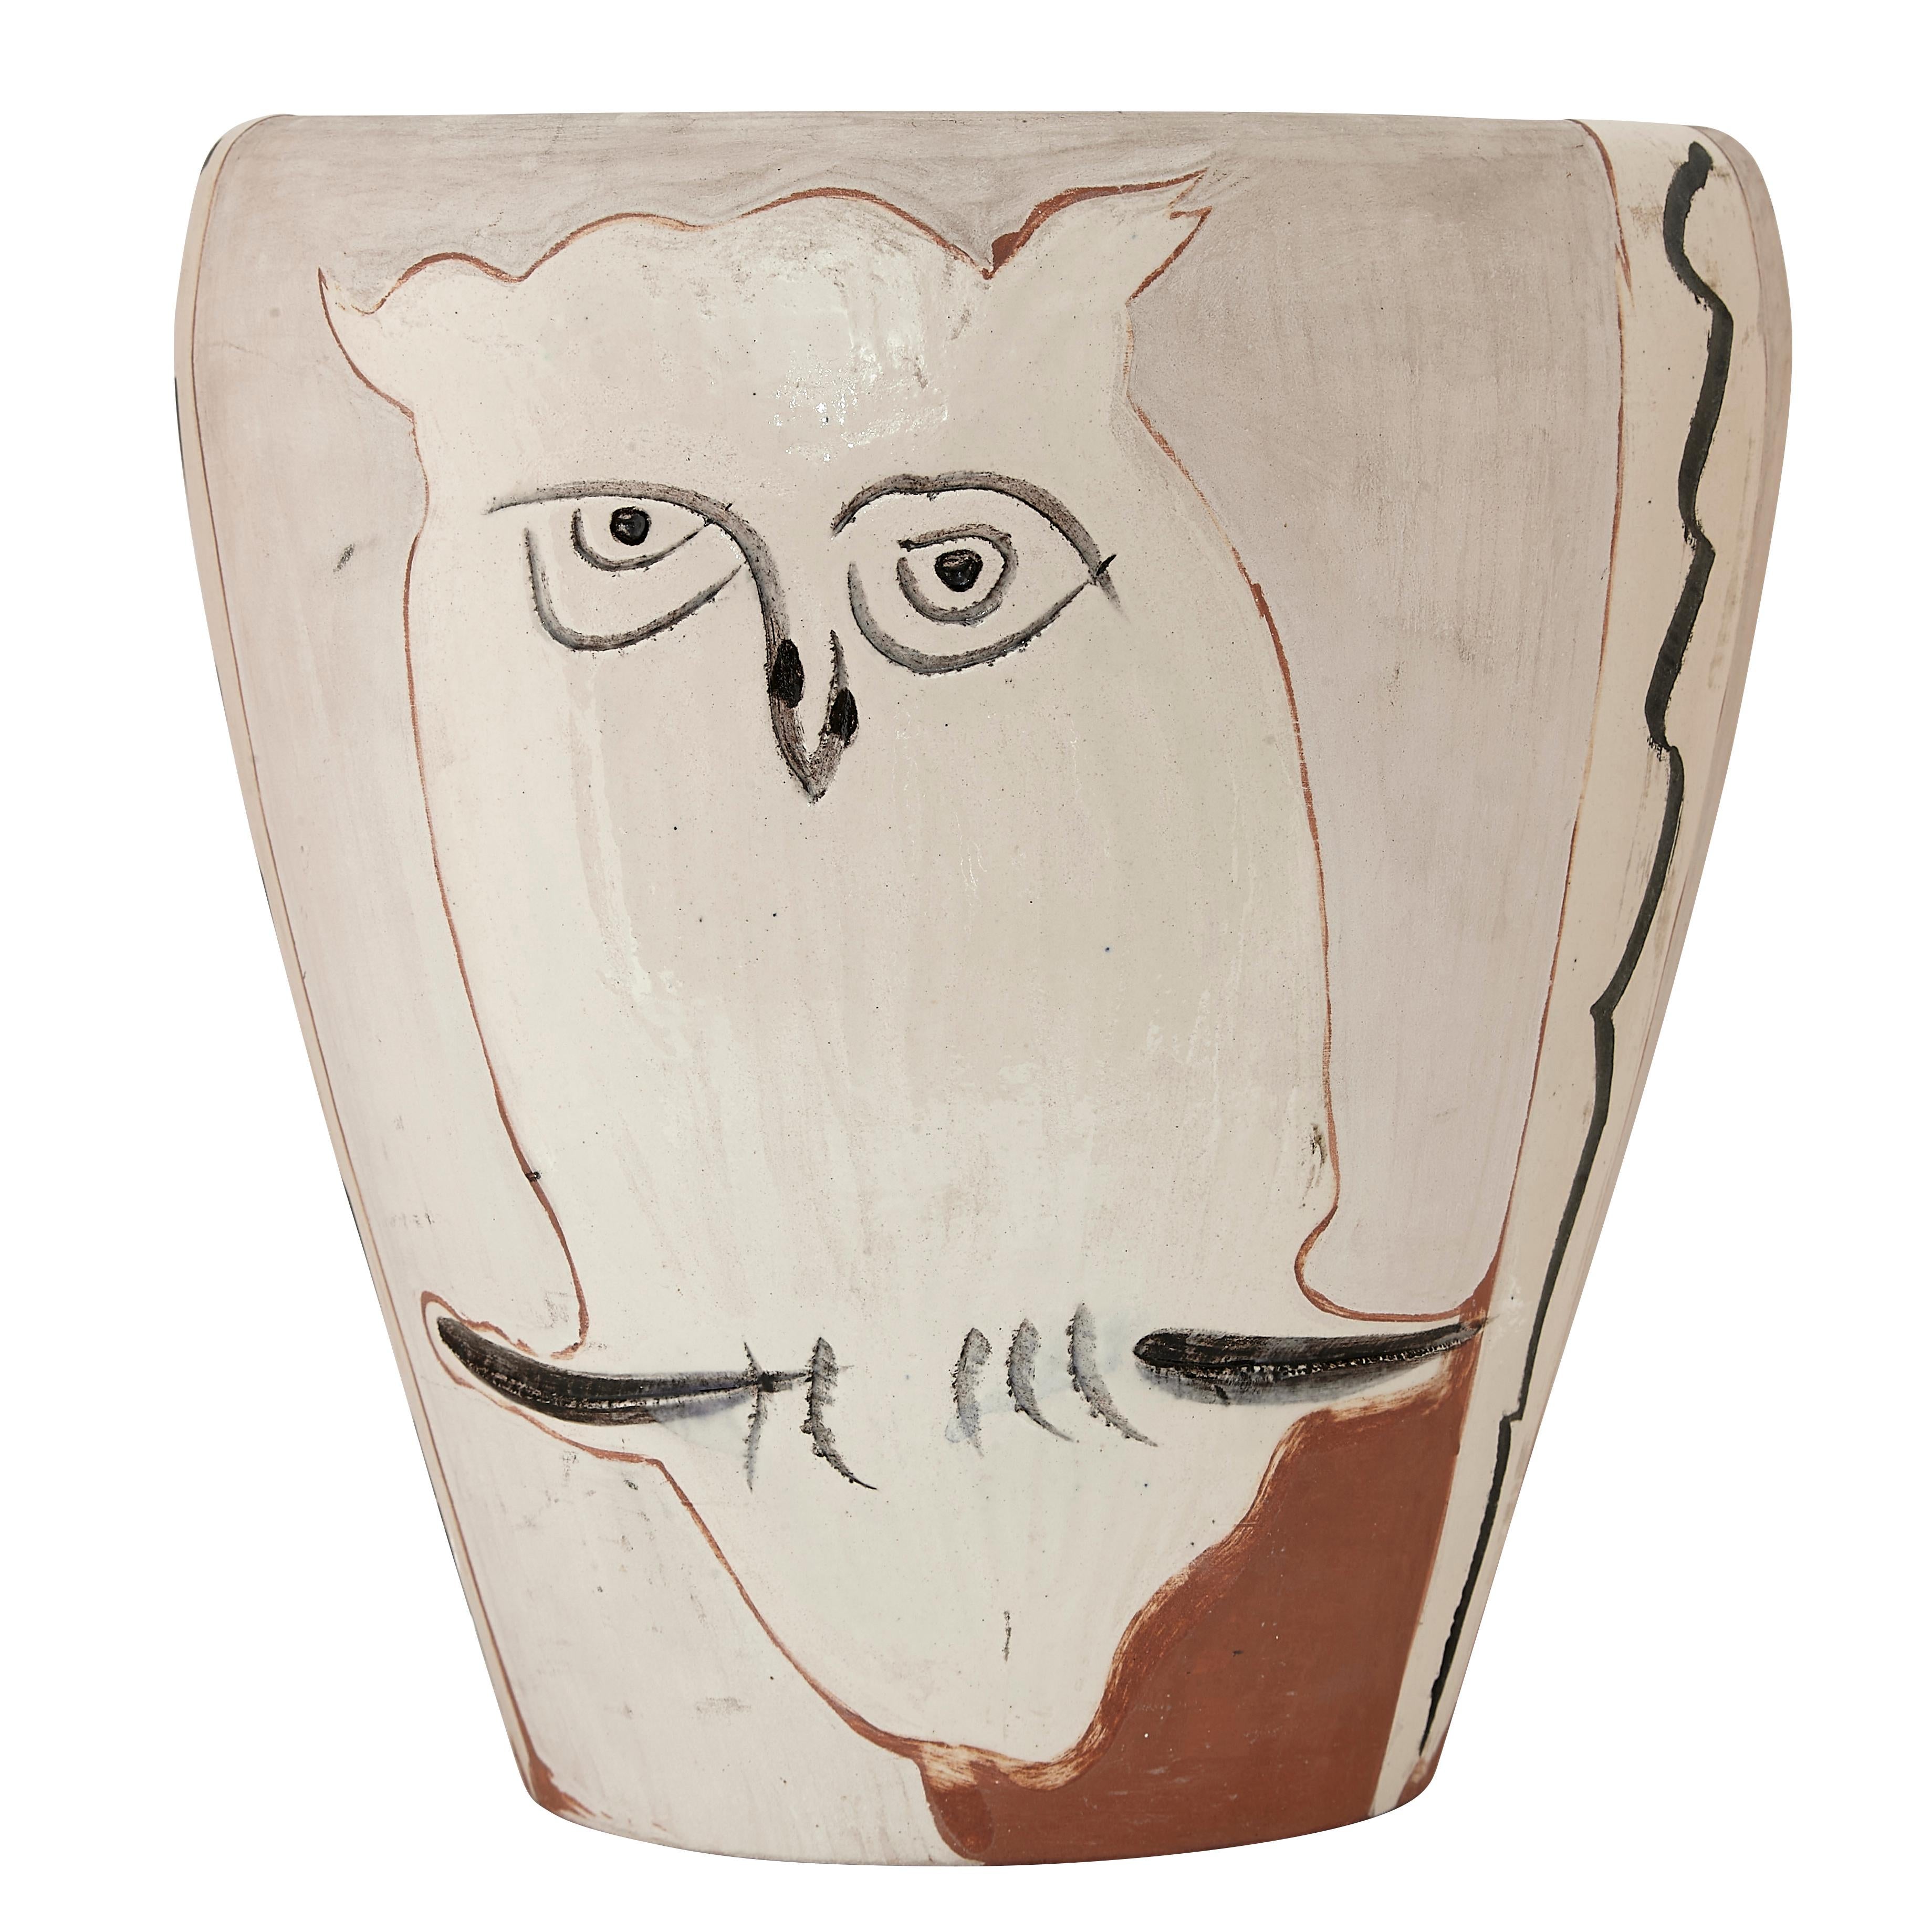 PABLO PICASSO (1881-1973) 
Visage et Hibou (A. R. 407) 

Terre de faïence vase, painted in colors and partially glazed, 1958, numbered 92/200 and inscribed 'Edition Picasso', with the Edition Picasso and Madoura stamps.